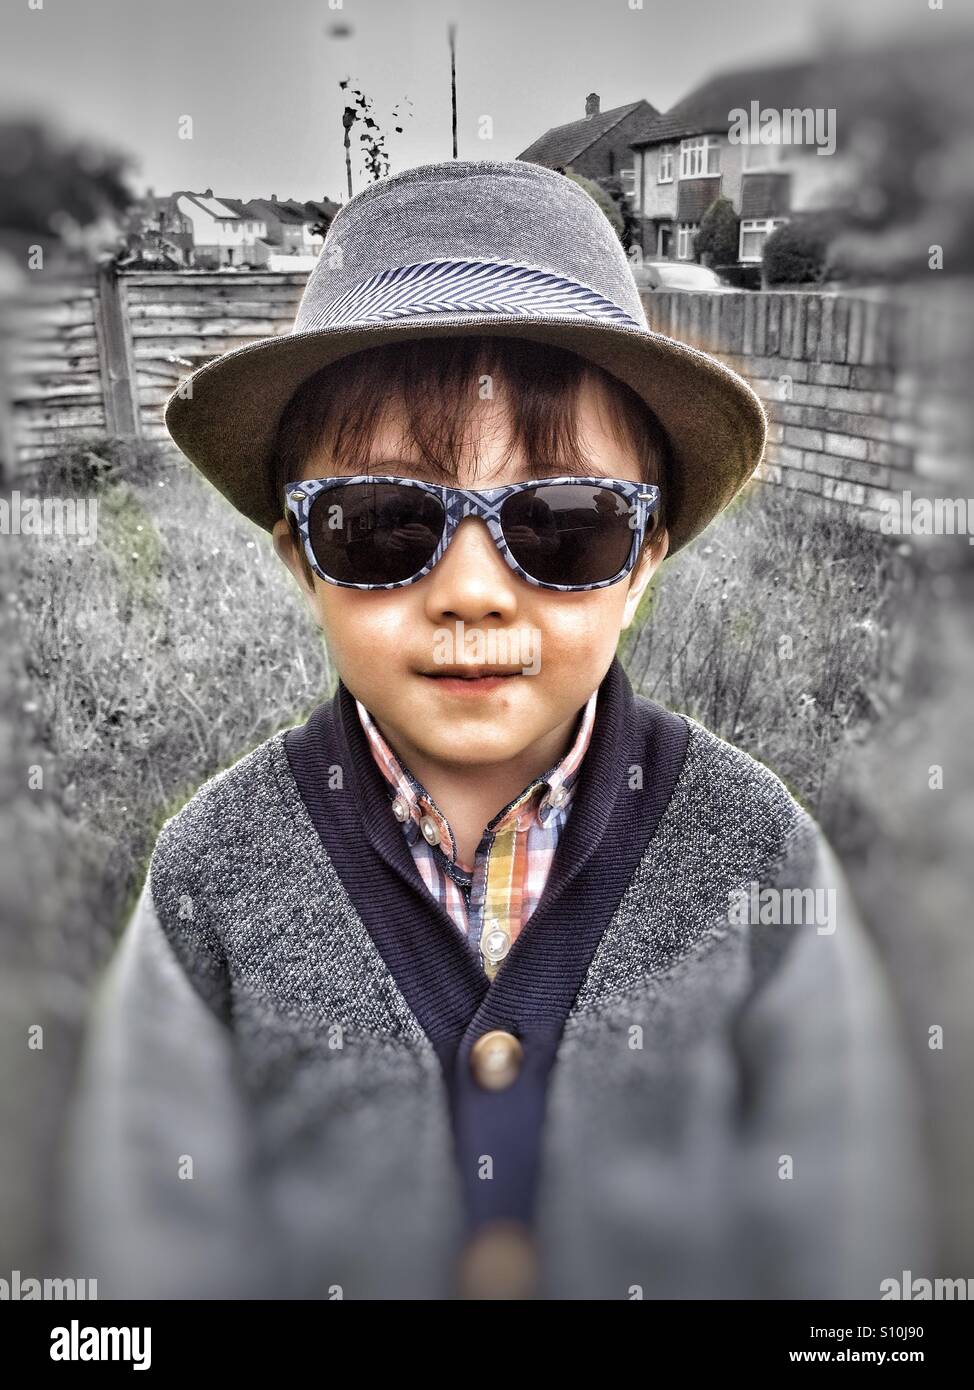 Boy Wearing Sunglasses High Resolution Stock Photography and Images - Alamy